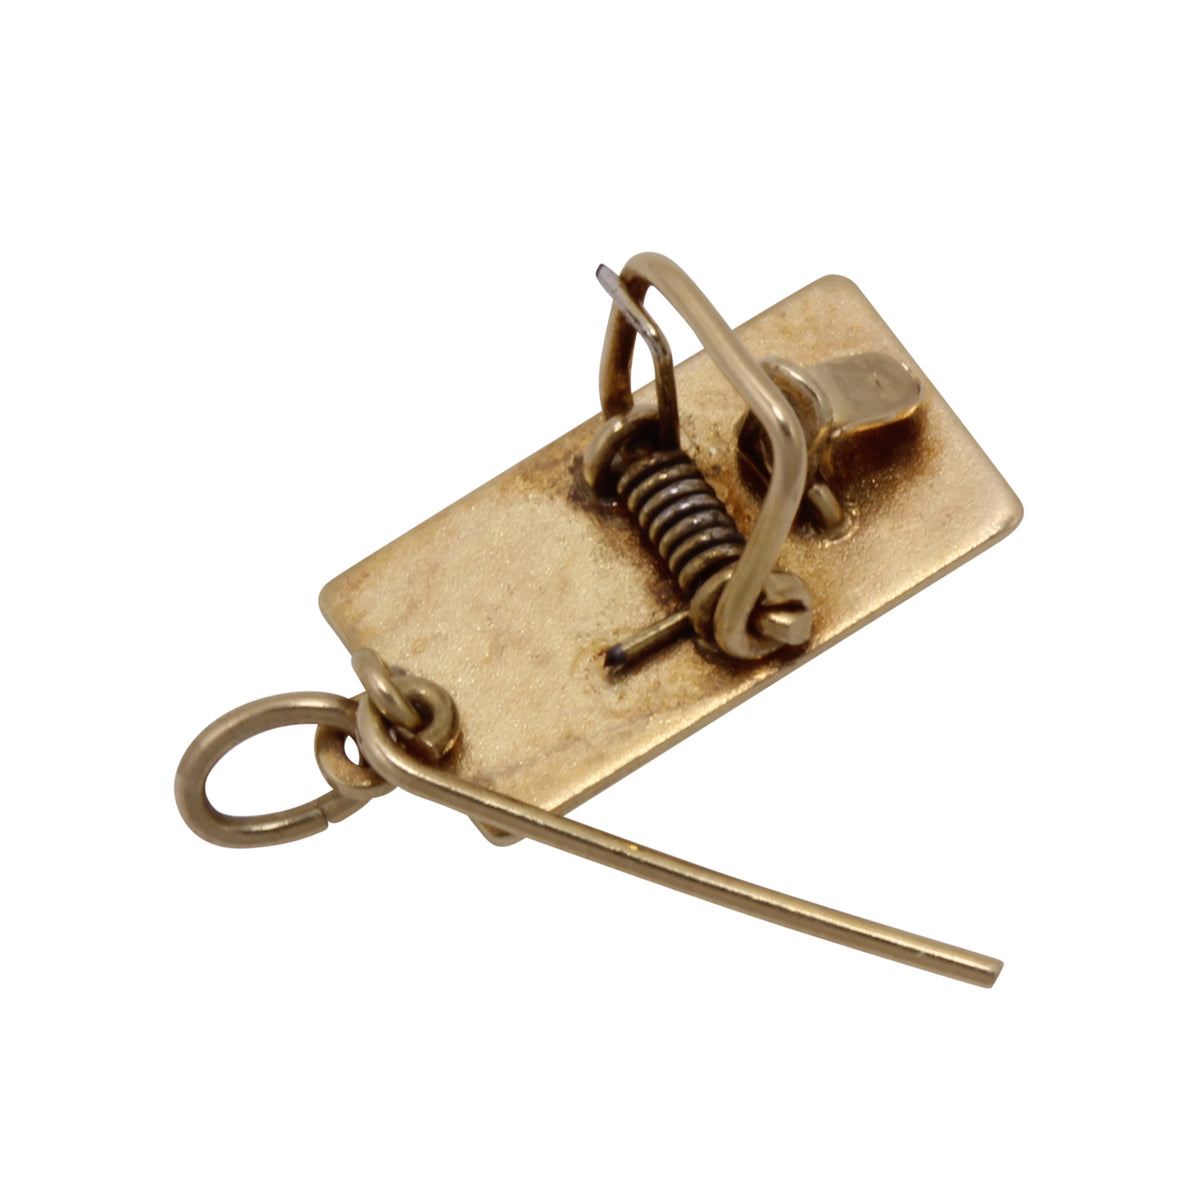 A Mysterious & Powerful Metal Triangle Mouse Trap. Rare & Valuable Vintage  Trap. Mousetrap Monday. 